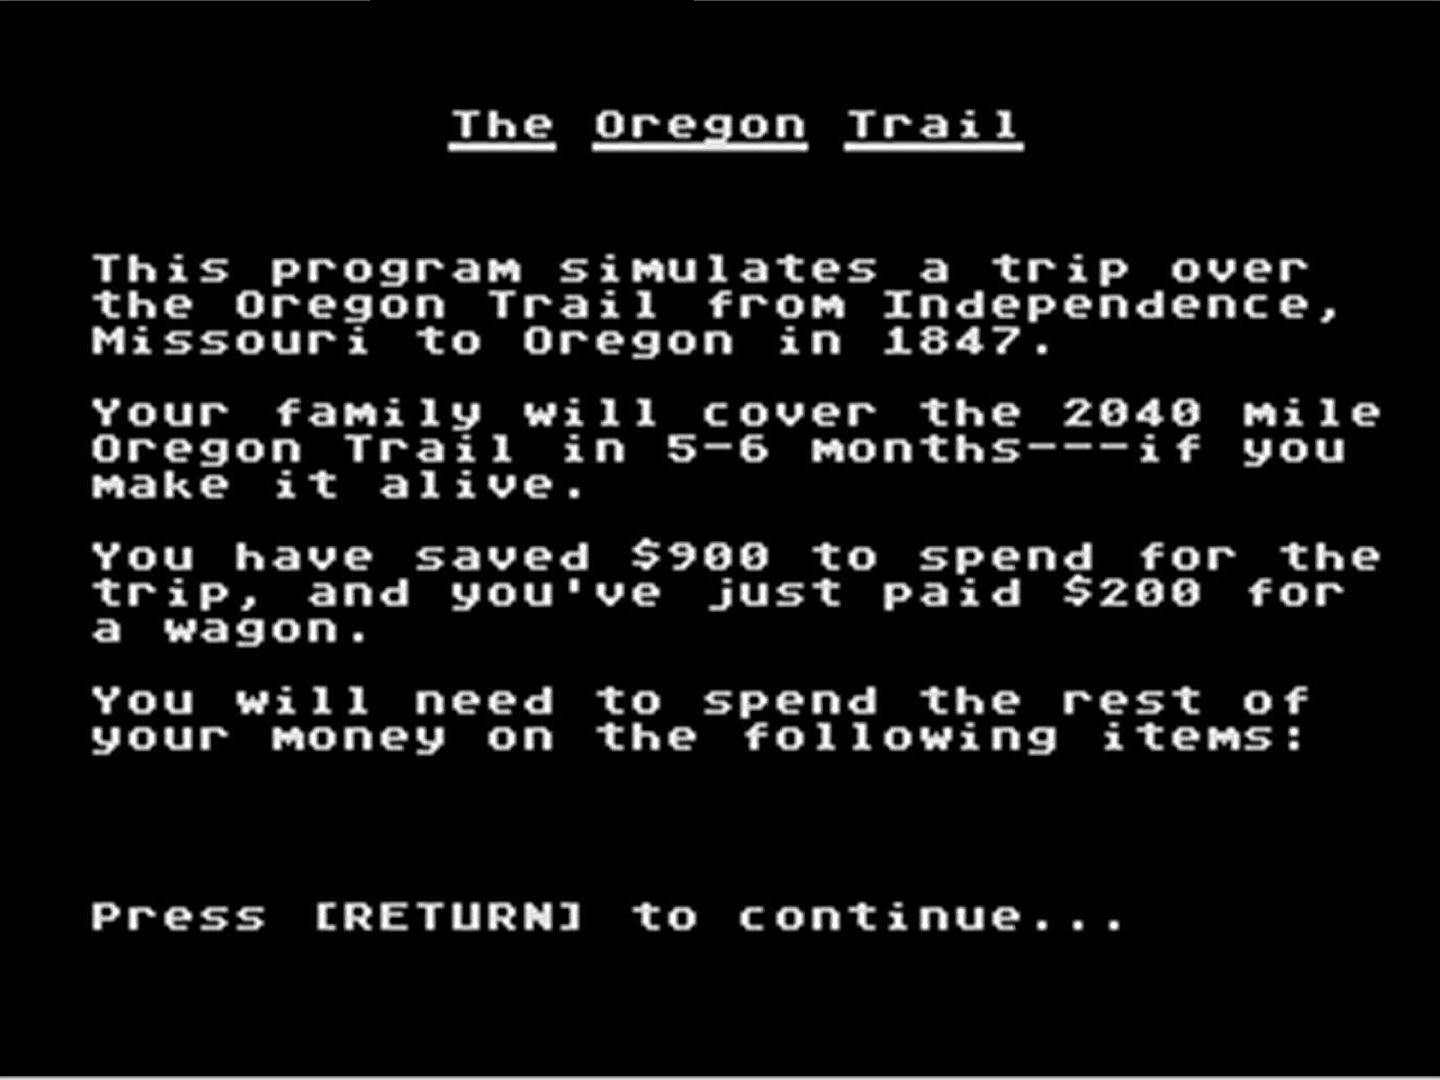 the oregon trail game free download